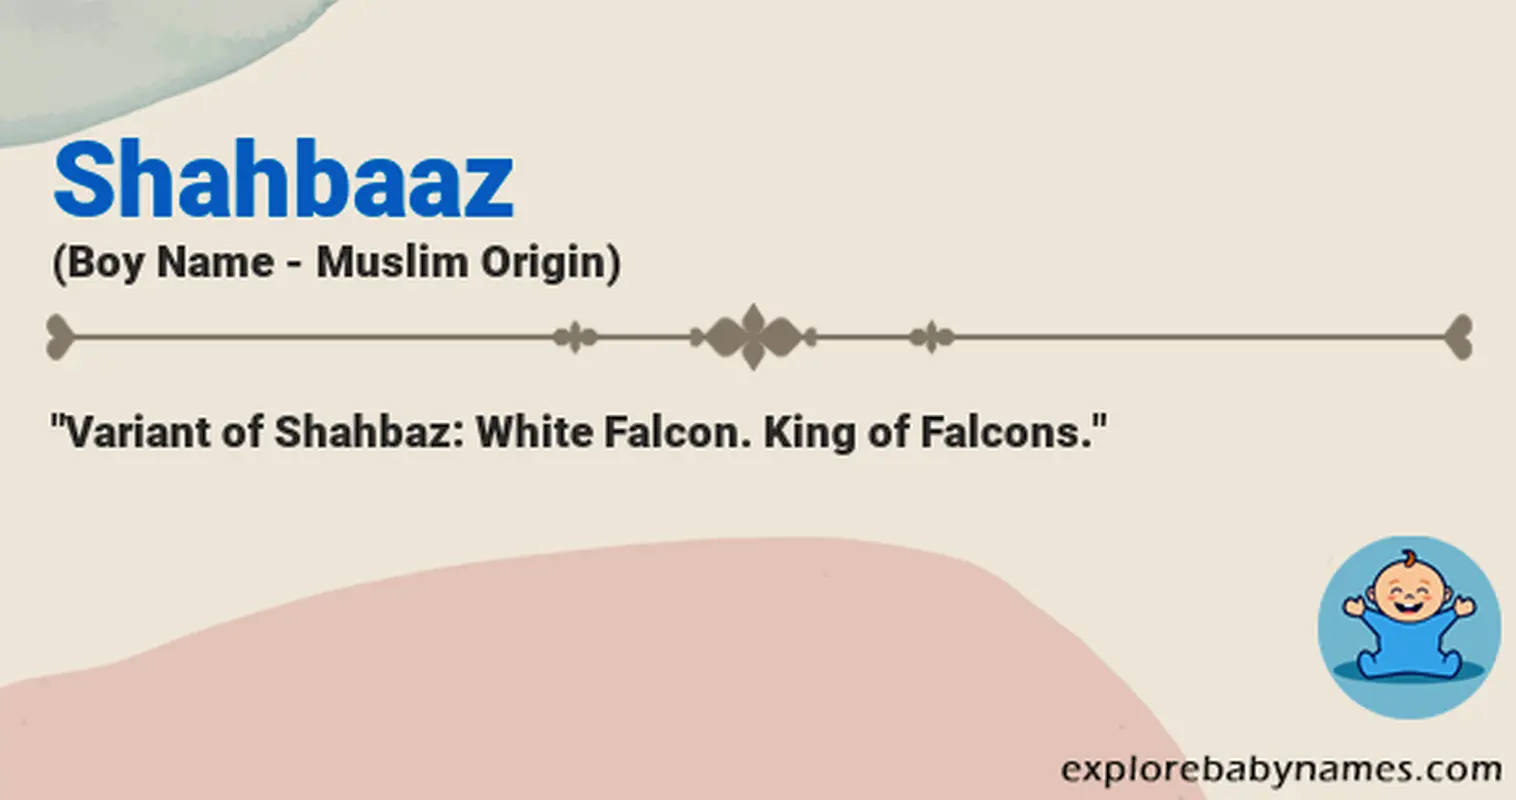 Meaning of Shahbaaz